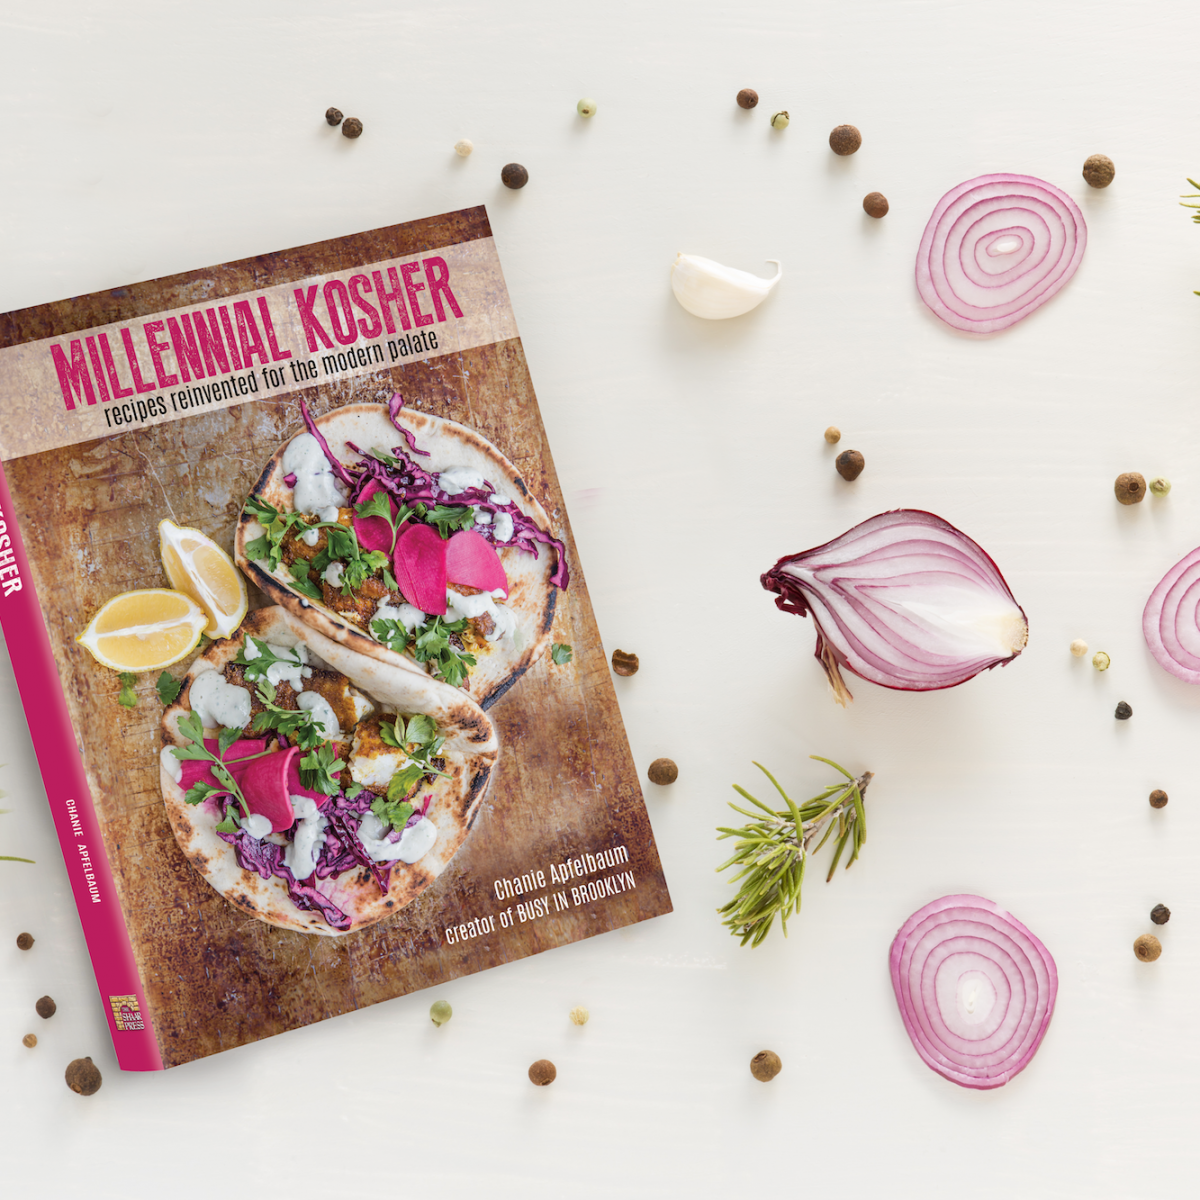 Millennial Kosher recipes reinvented for the modern palate 